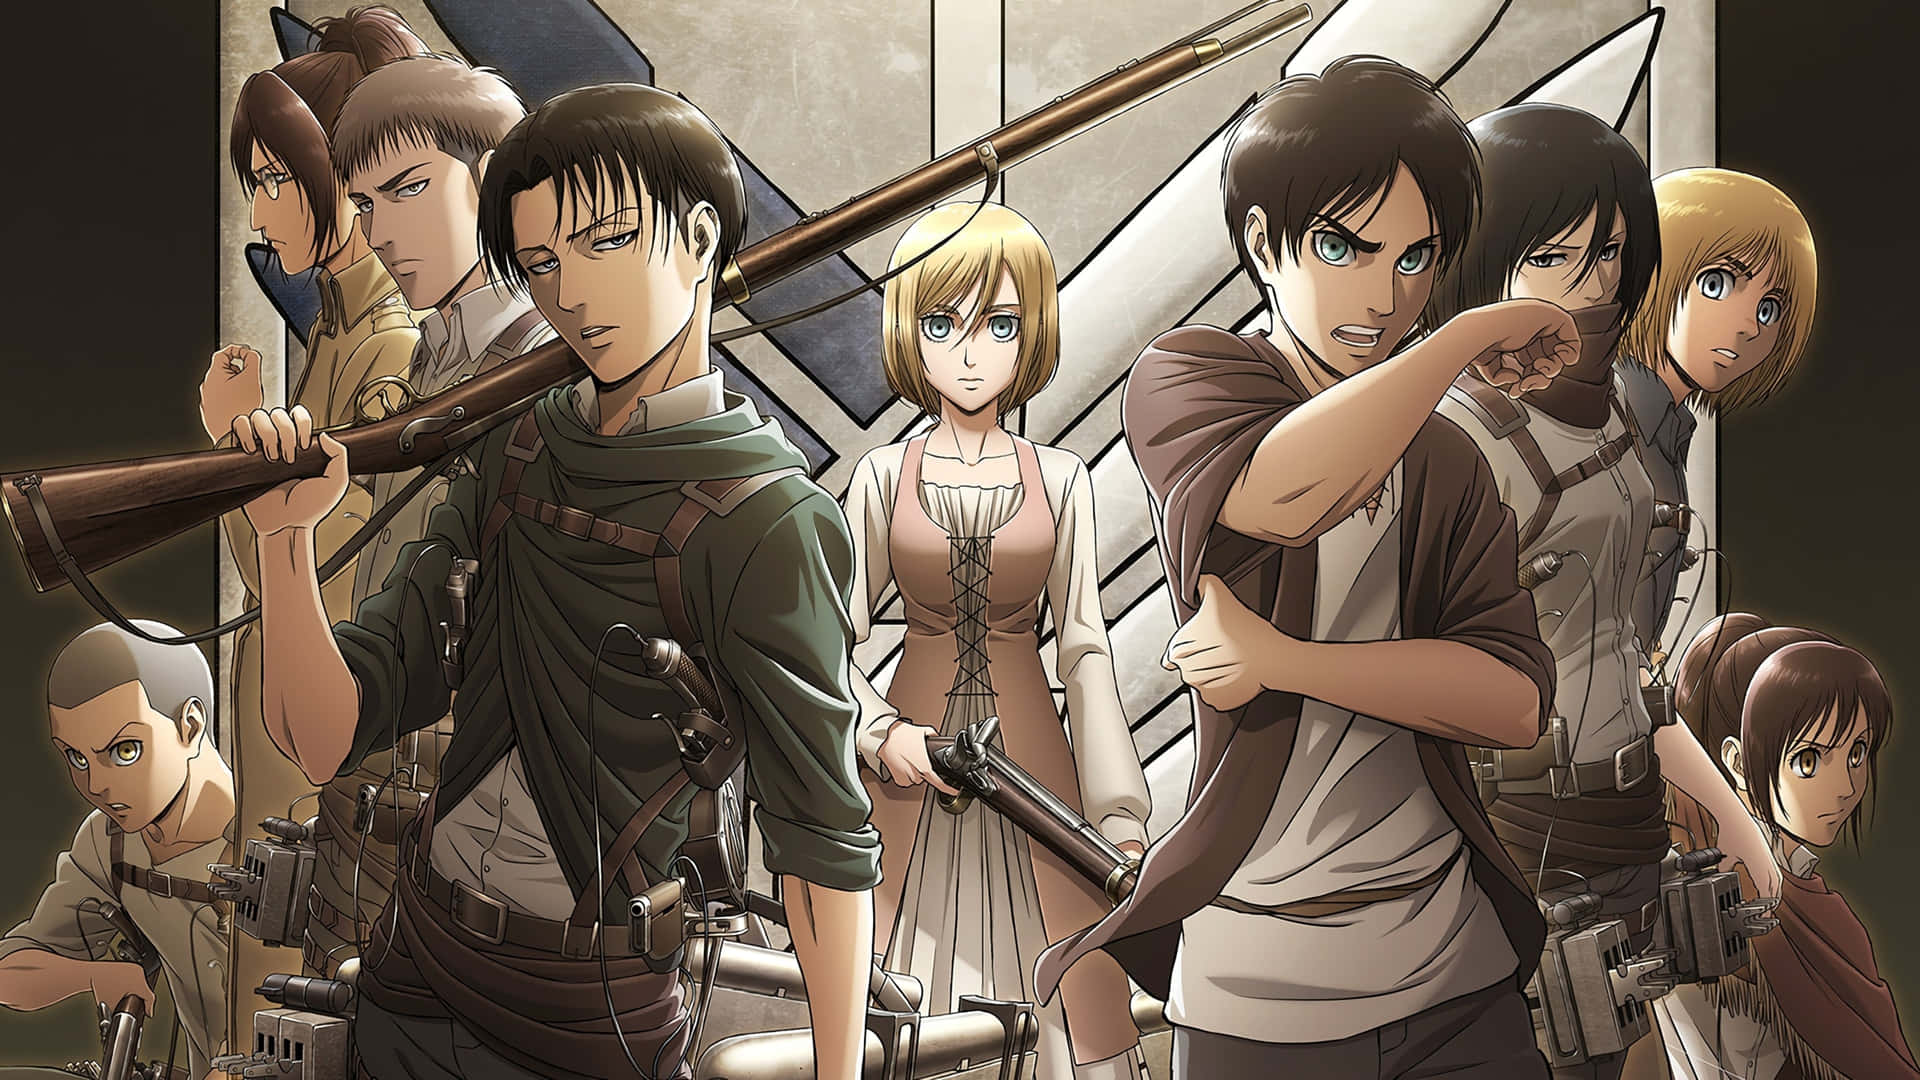 400+] Attack On Titan Wallpapers